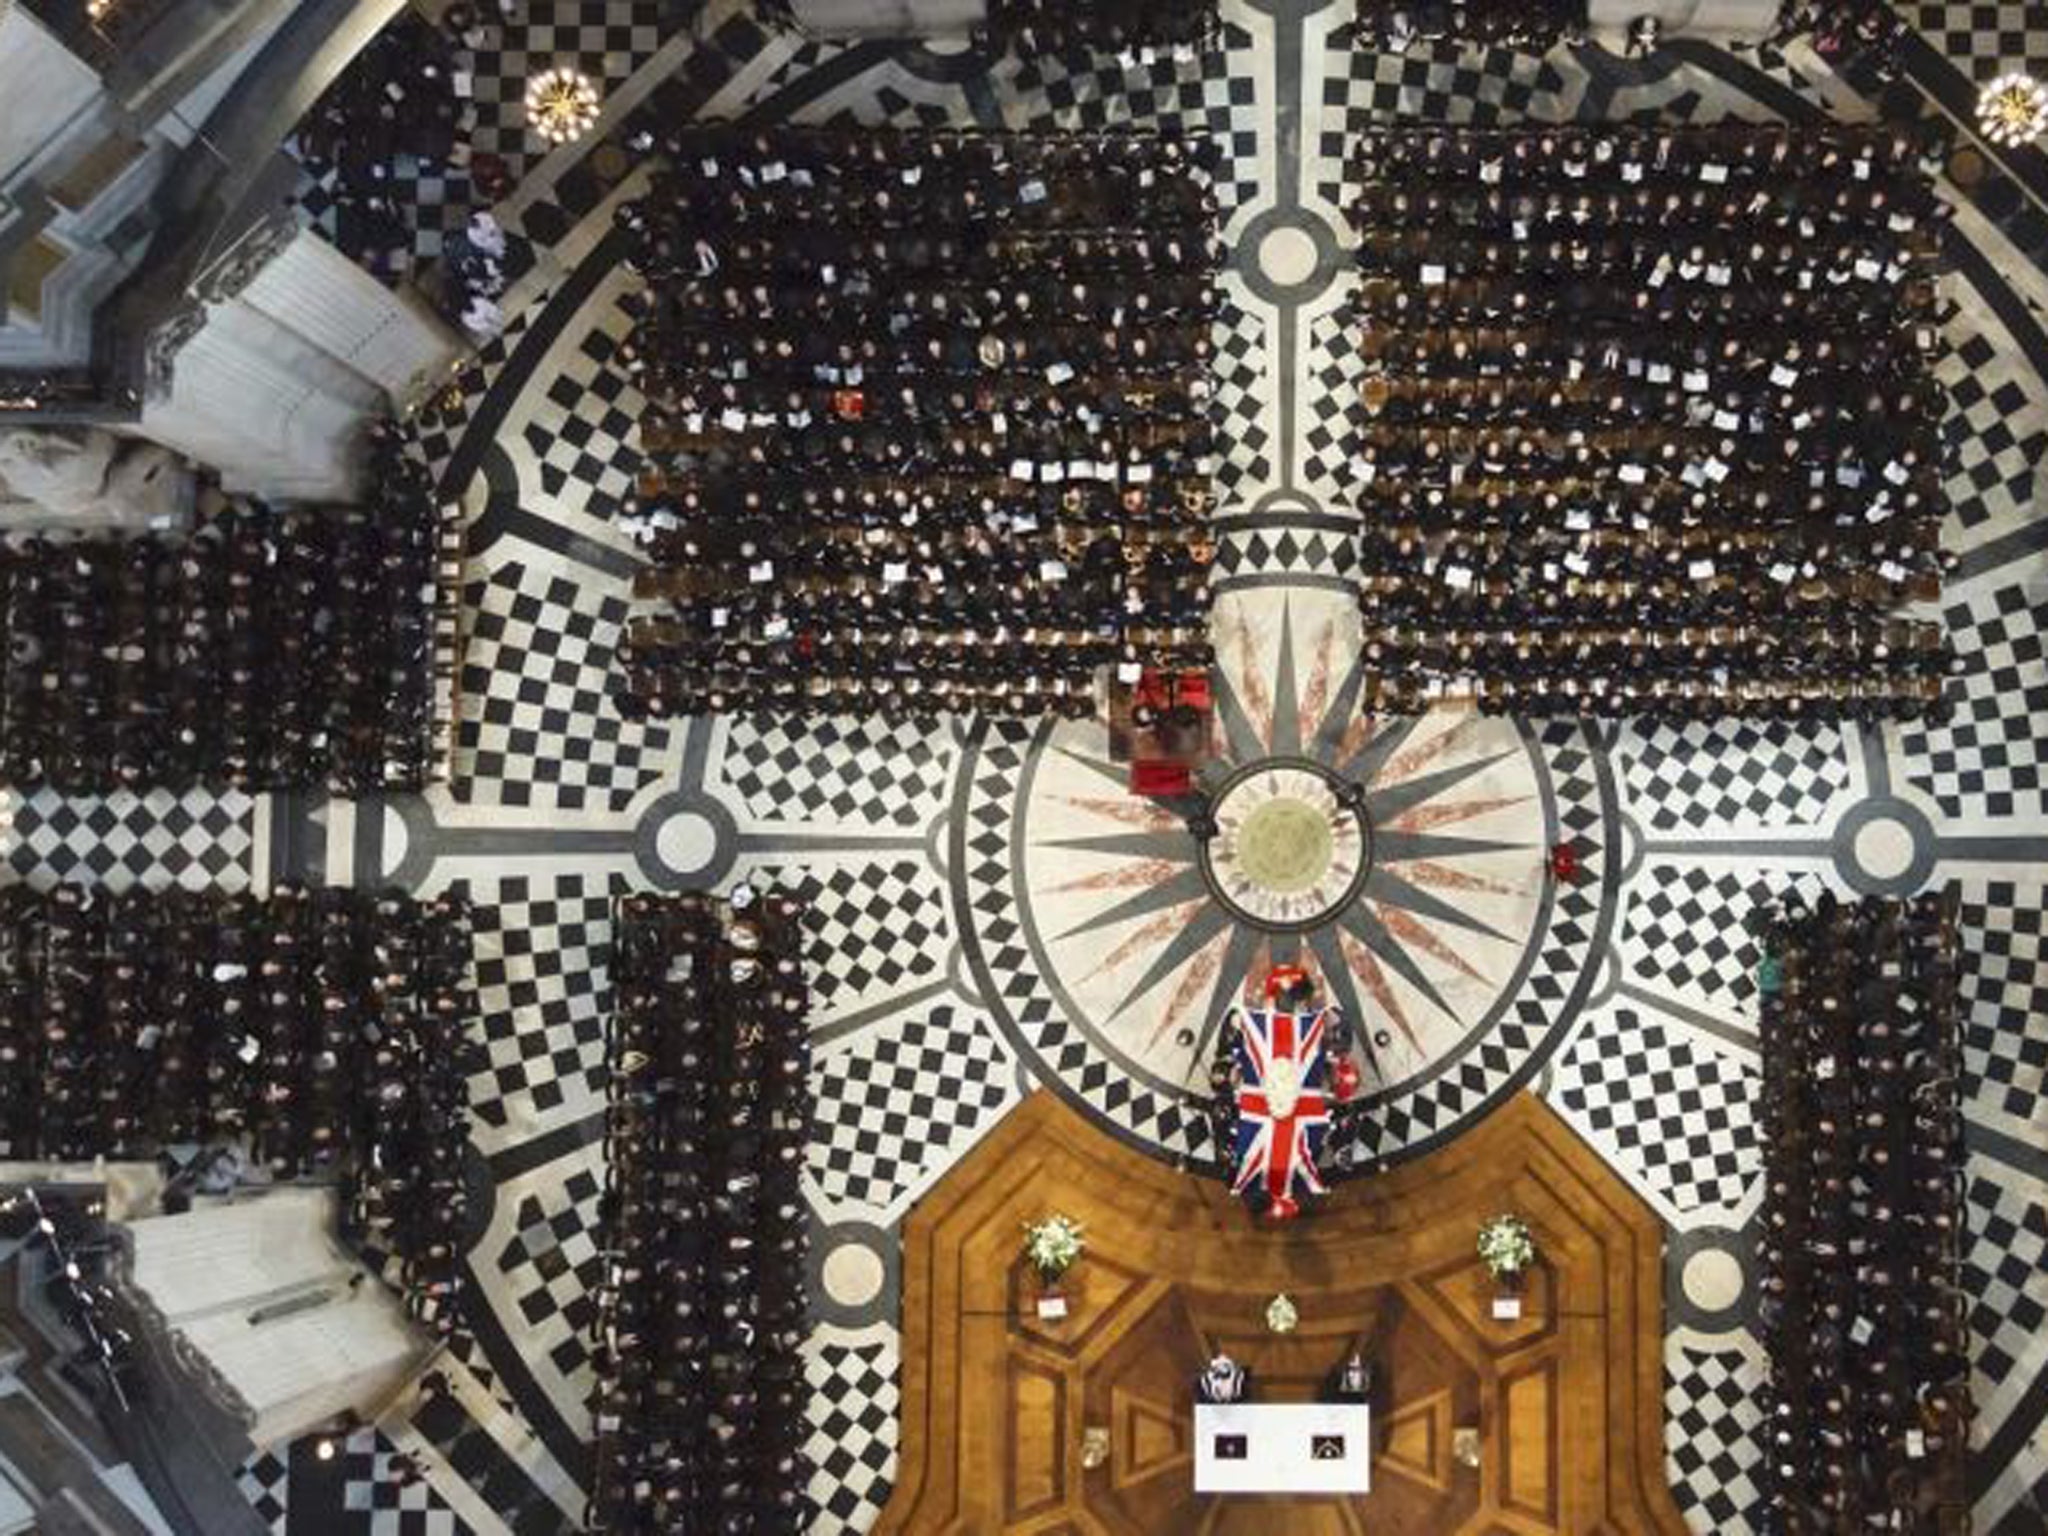 Over 2,000 of her friends, colleagues, political foes and allies alike gathered in St Paul’s to pay their final respect to Britain’s first female Prime Minister